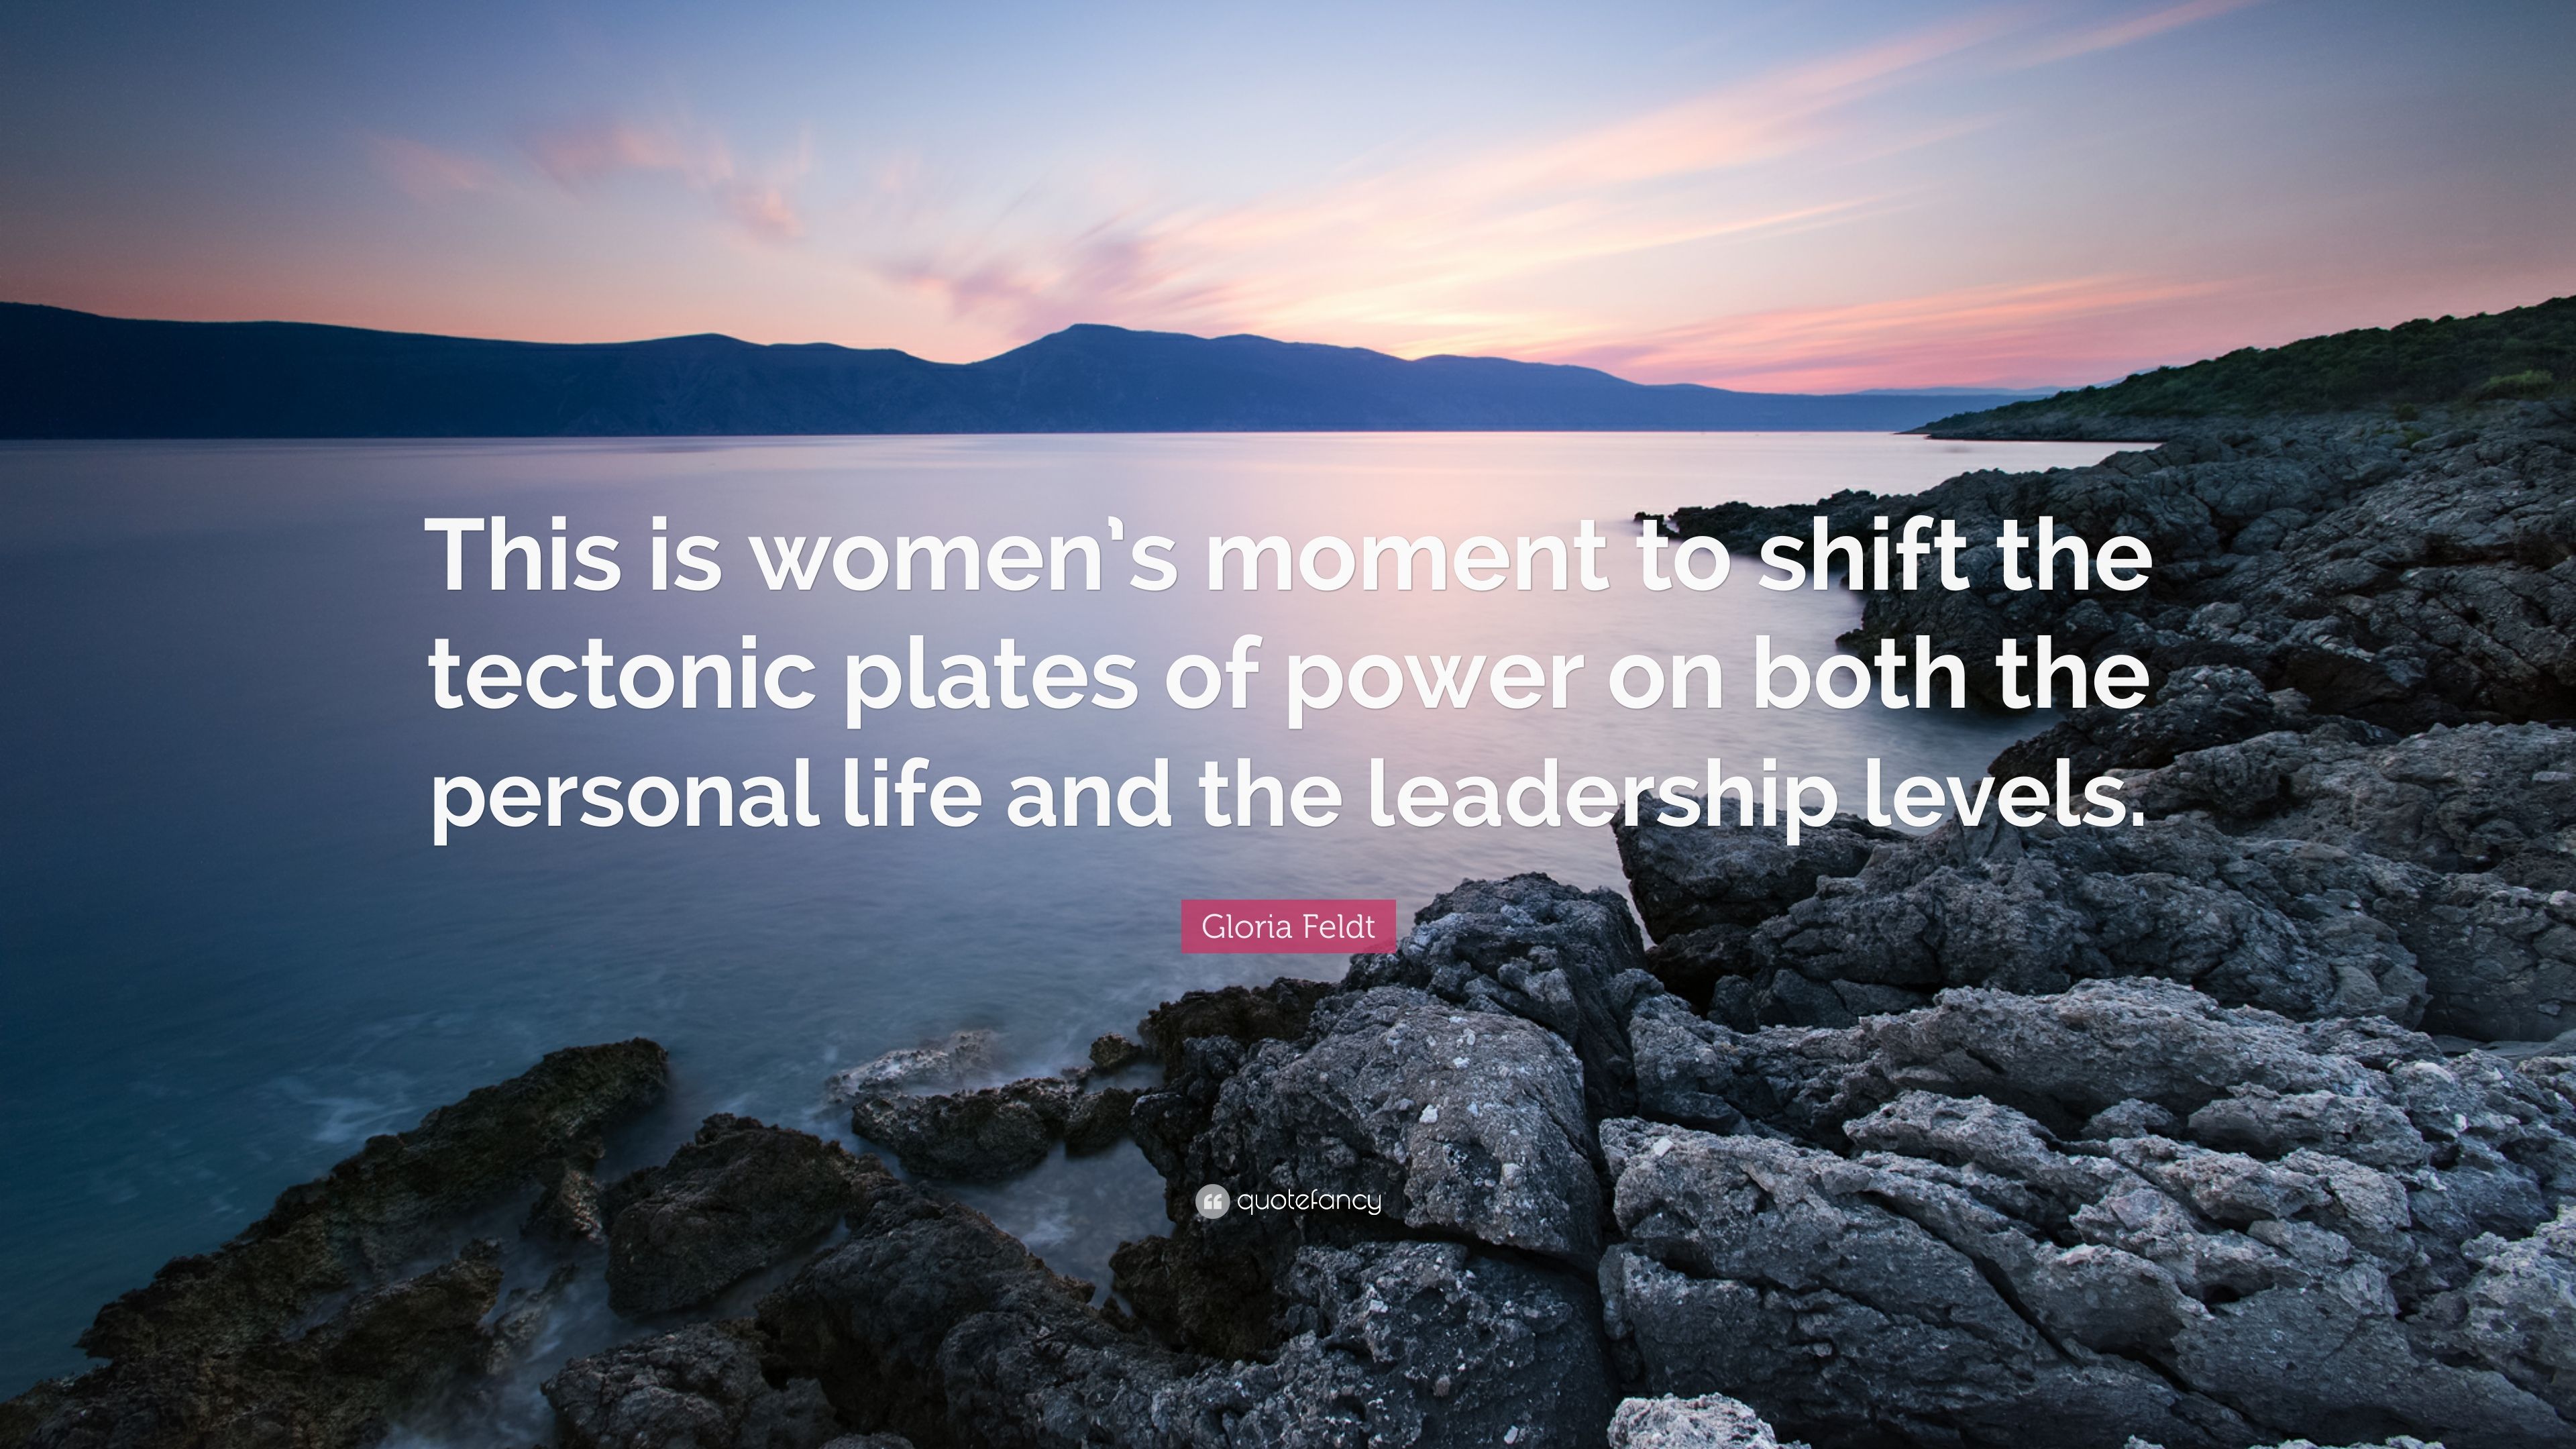 Gloria Feldt Quote: “This is women's moment to shift the tectonic